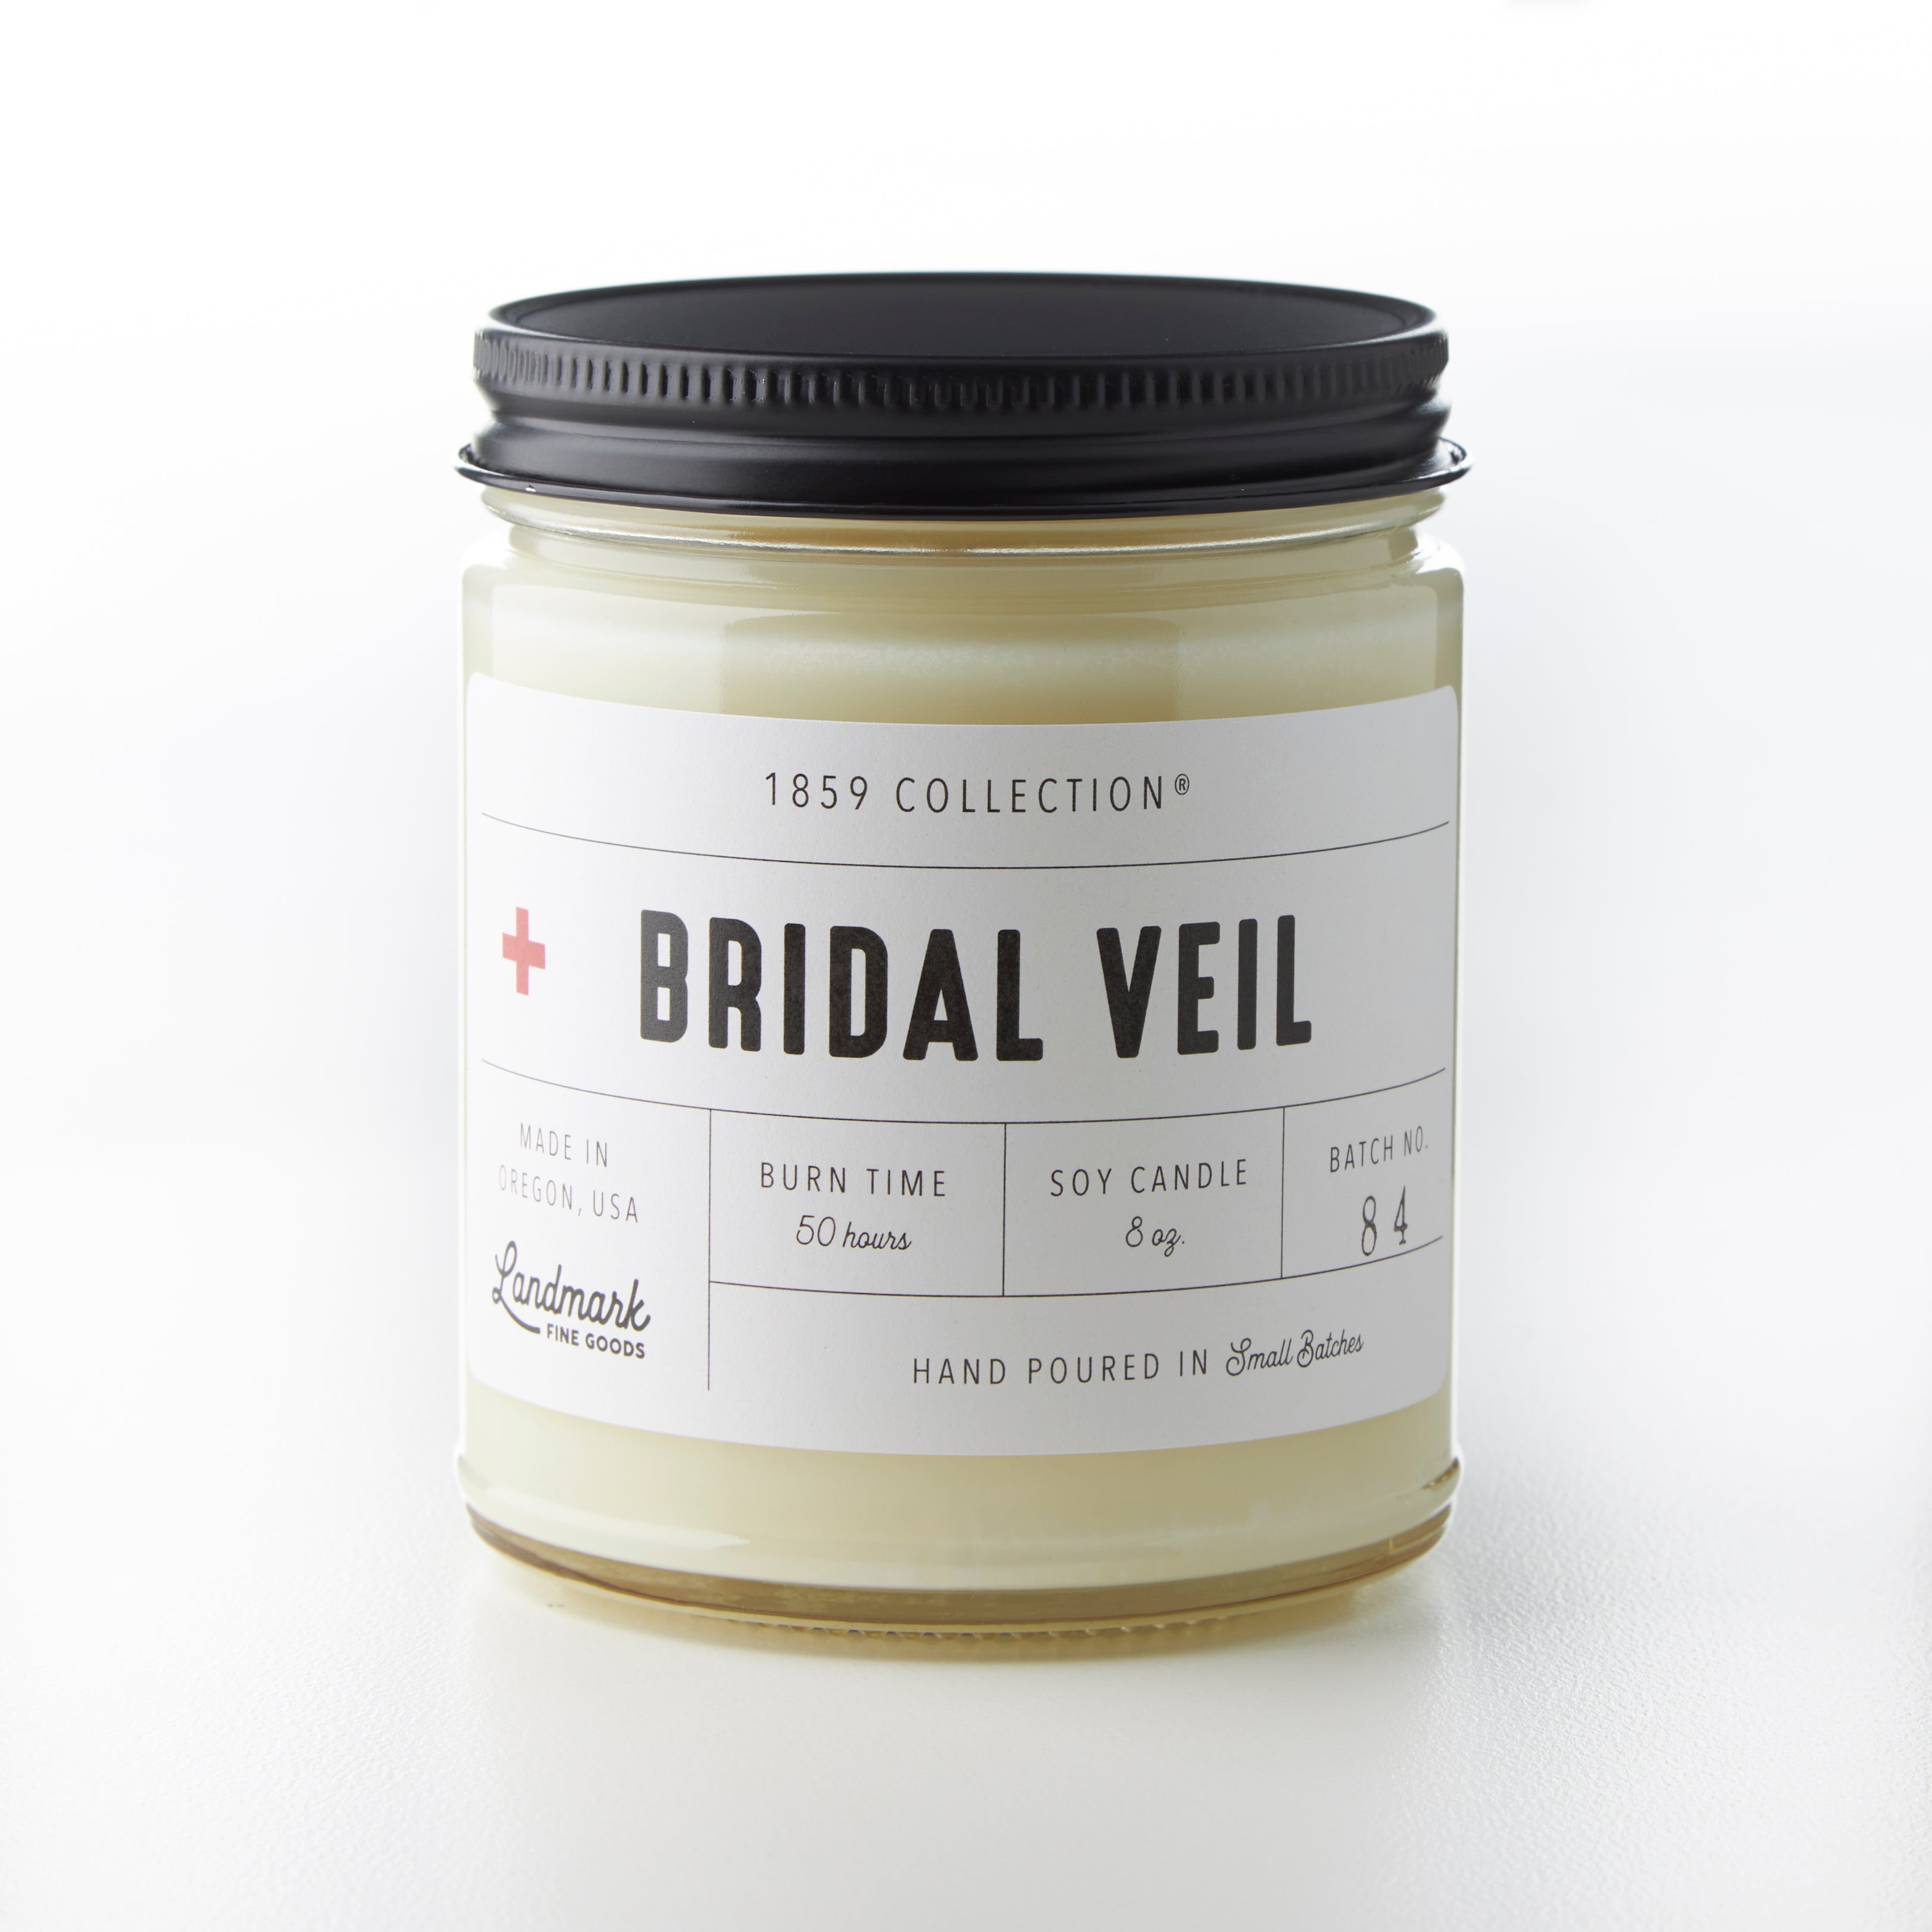 Bridal Veil Candle - 1859 Collection®